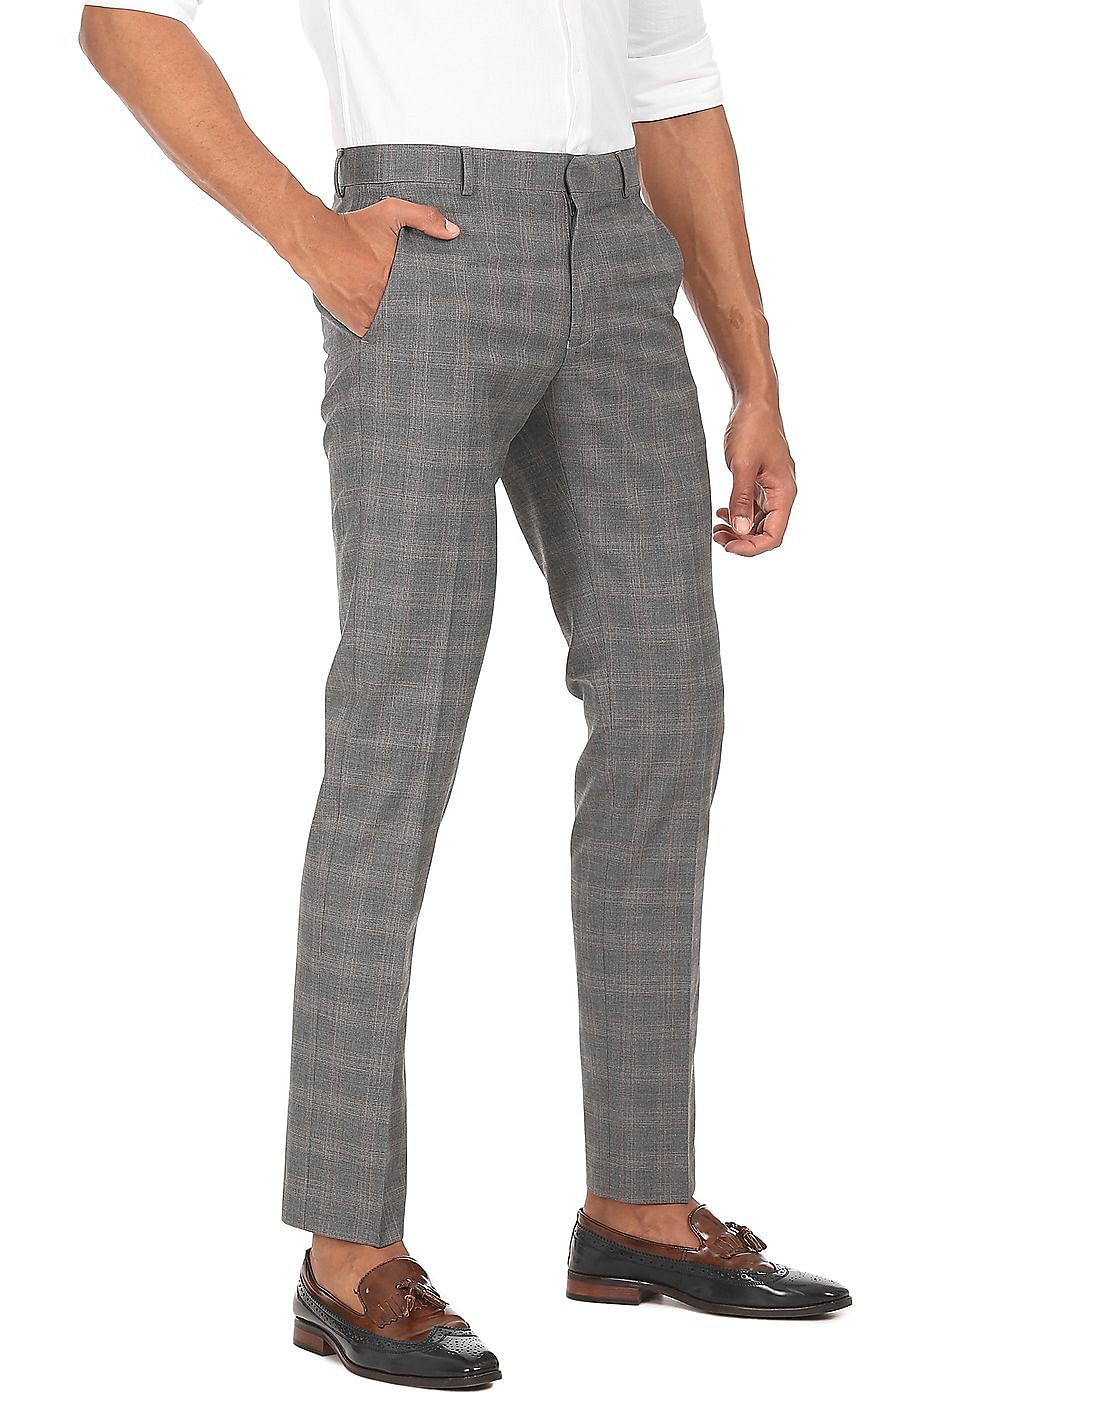 Buy Men Grey Check Carrot Fit Casual Trousers Online  758288  Peter  England